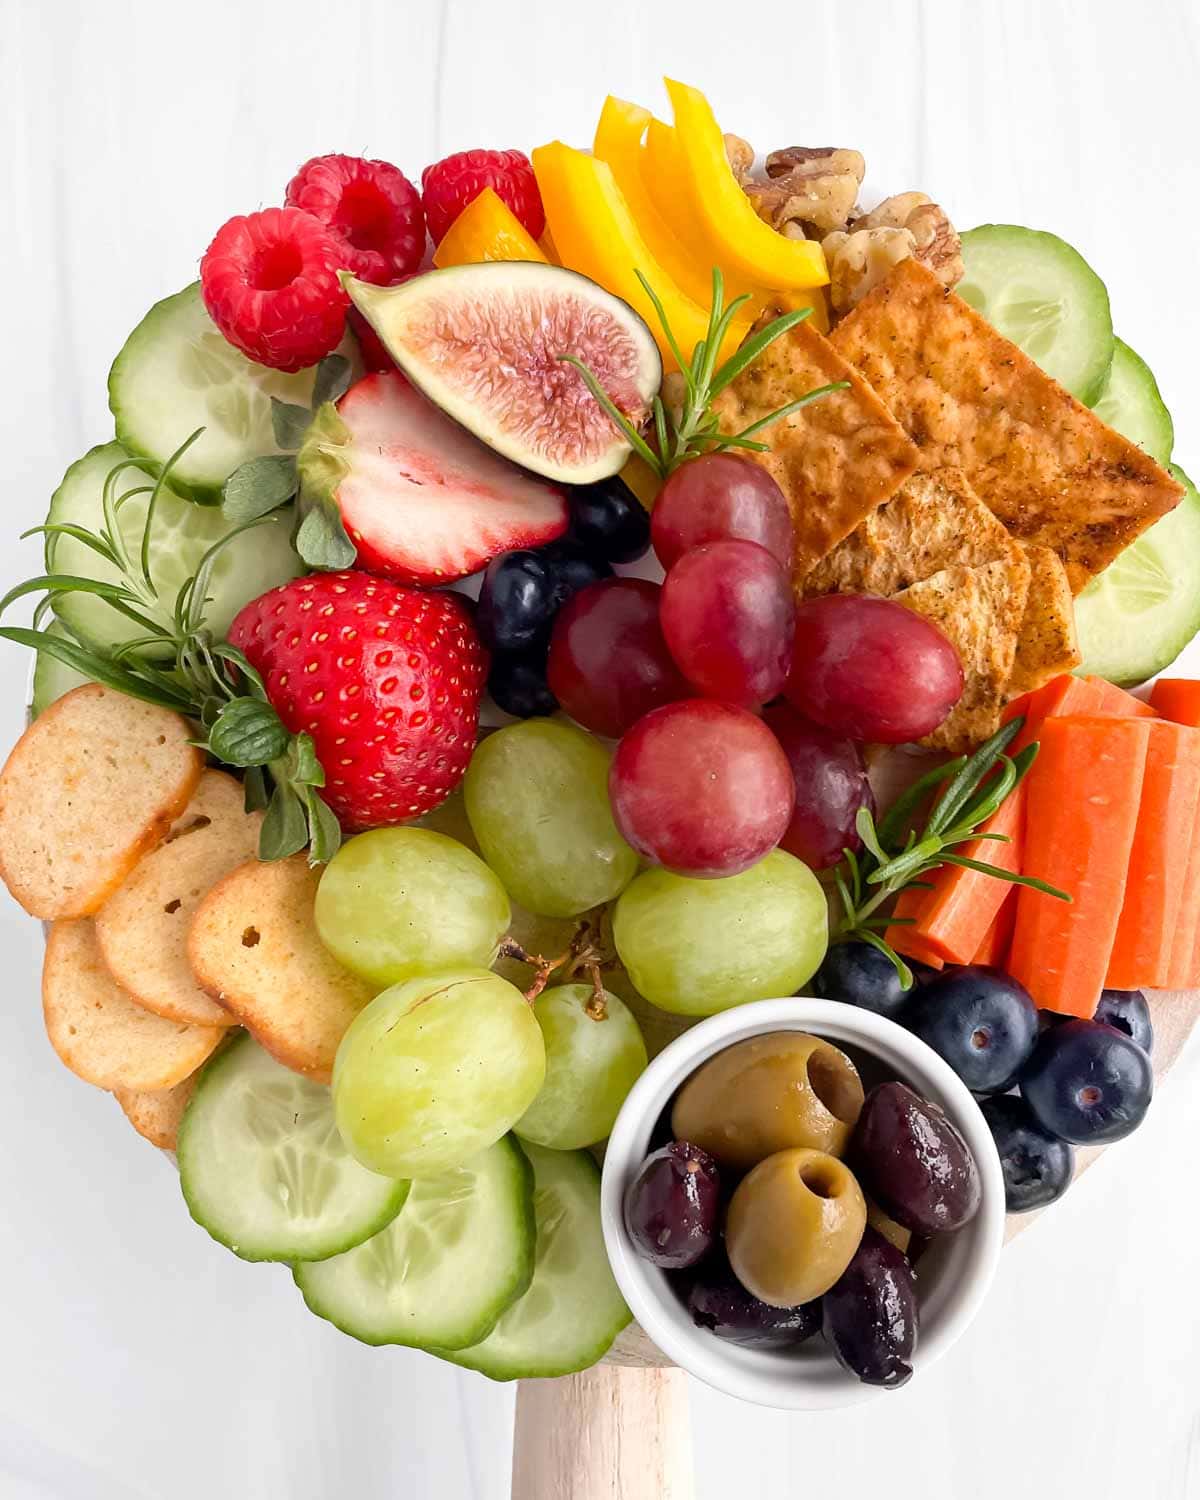 A small charcuterie board filled with olives, blueberries, strawberries, raspberries, grapes, cucumbers, carrots, peppers, crackers, and fresh rosemary.